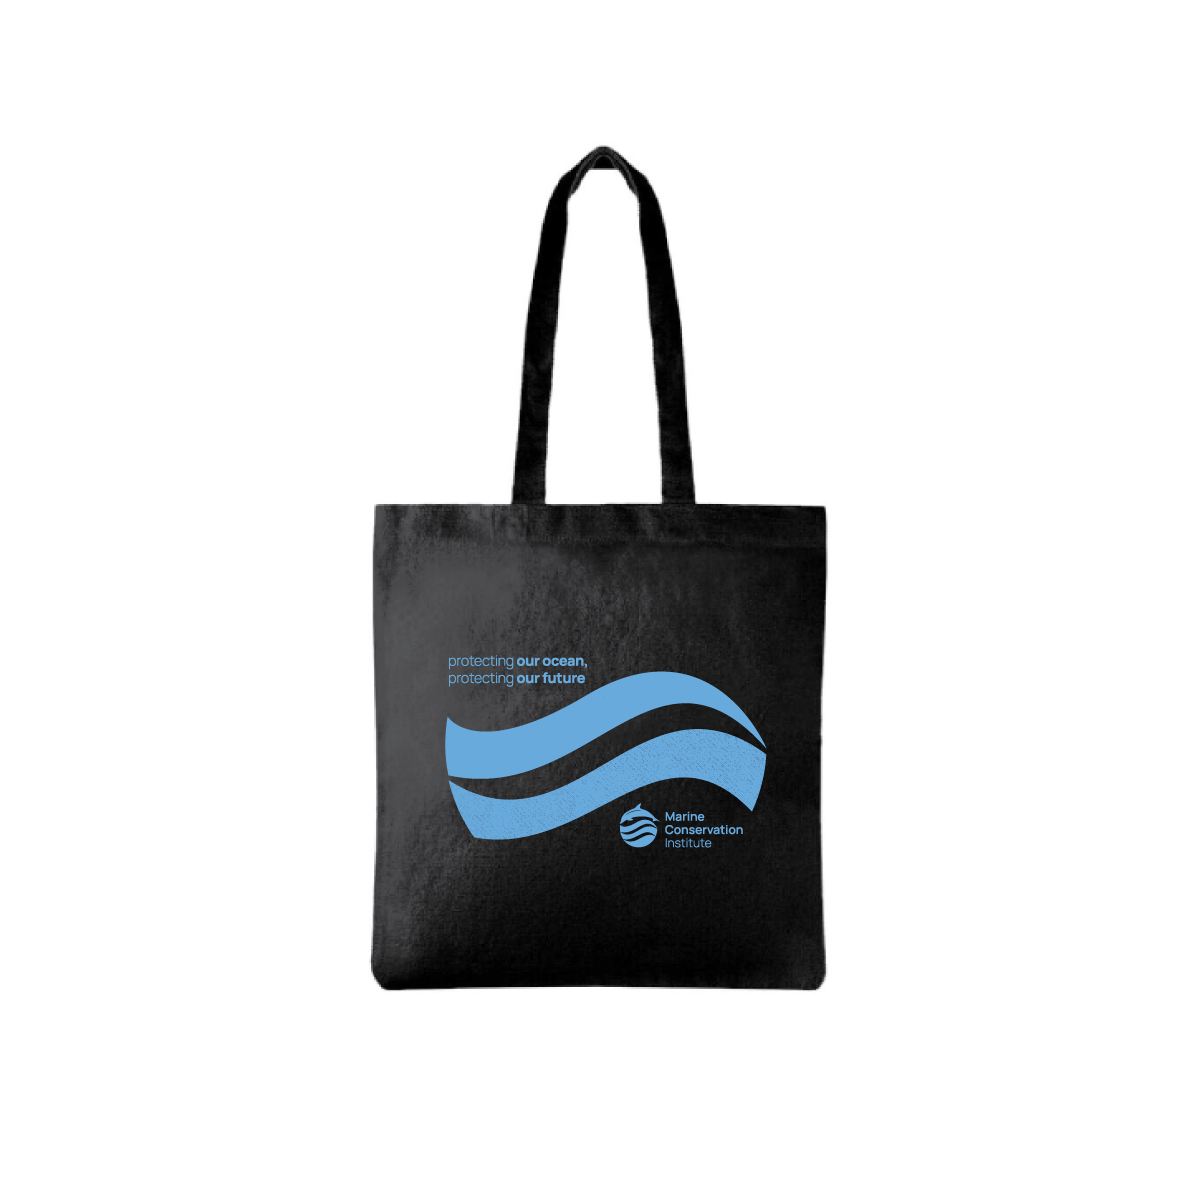 MarineConservation_tote_1.png